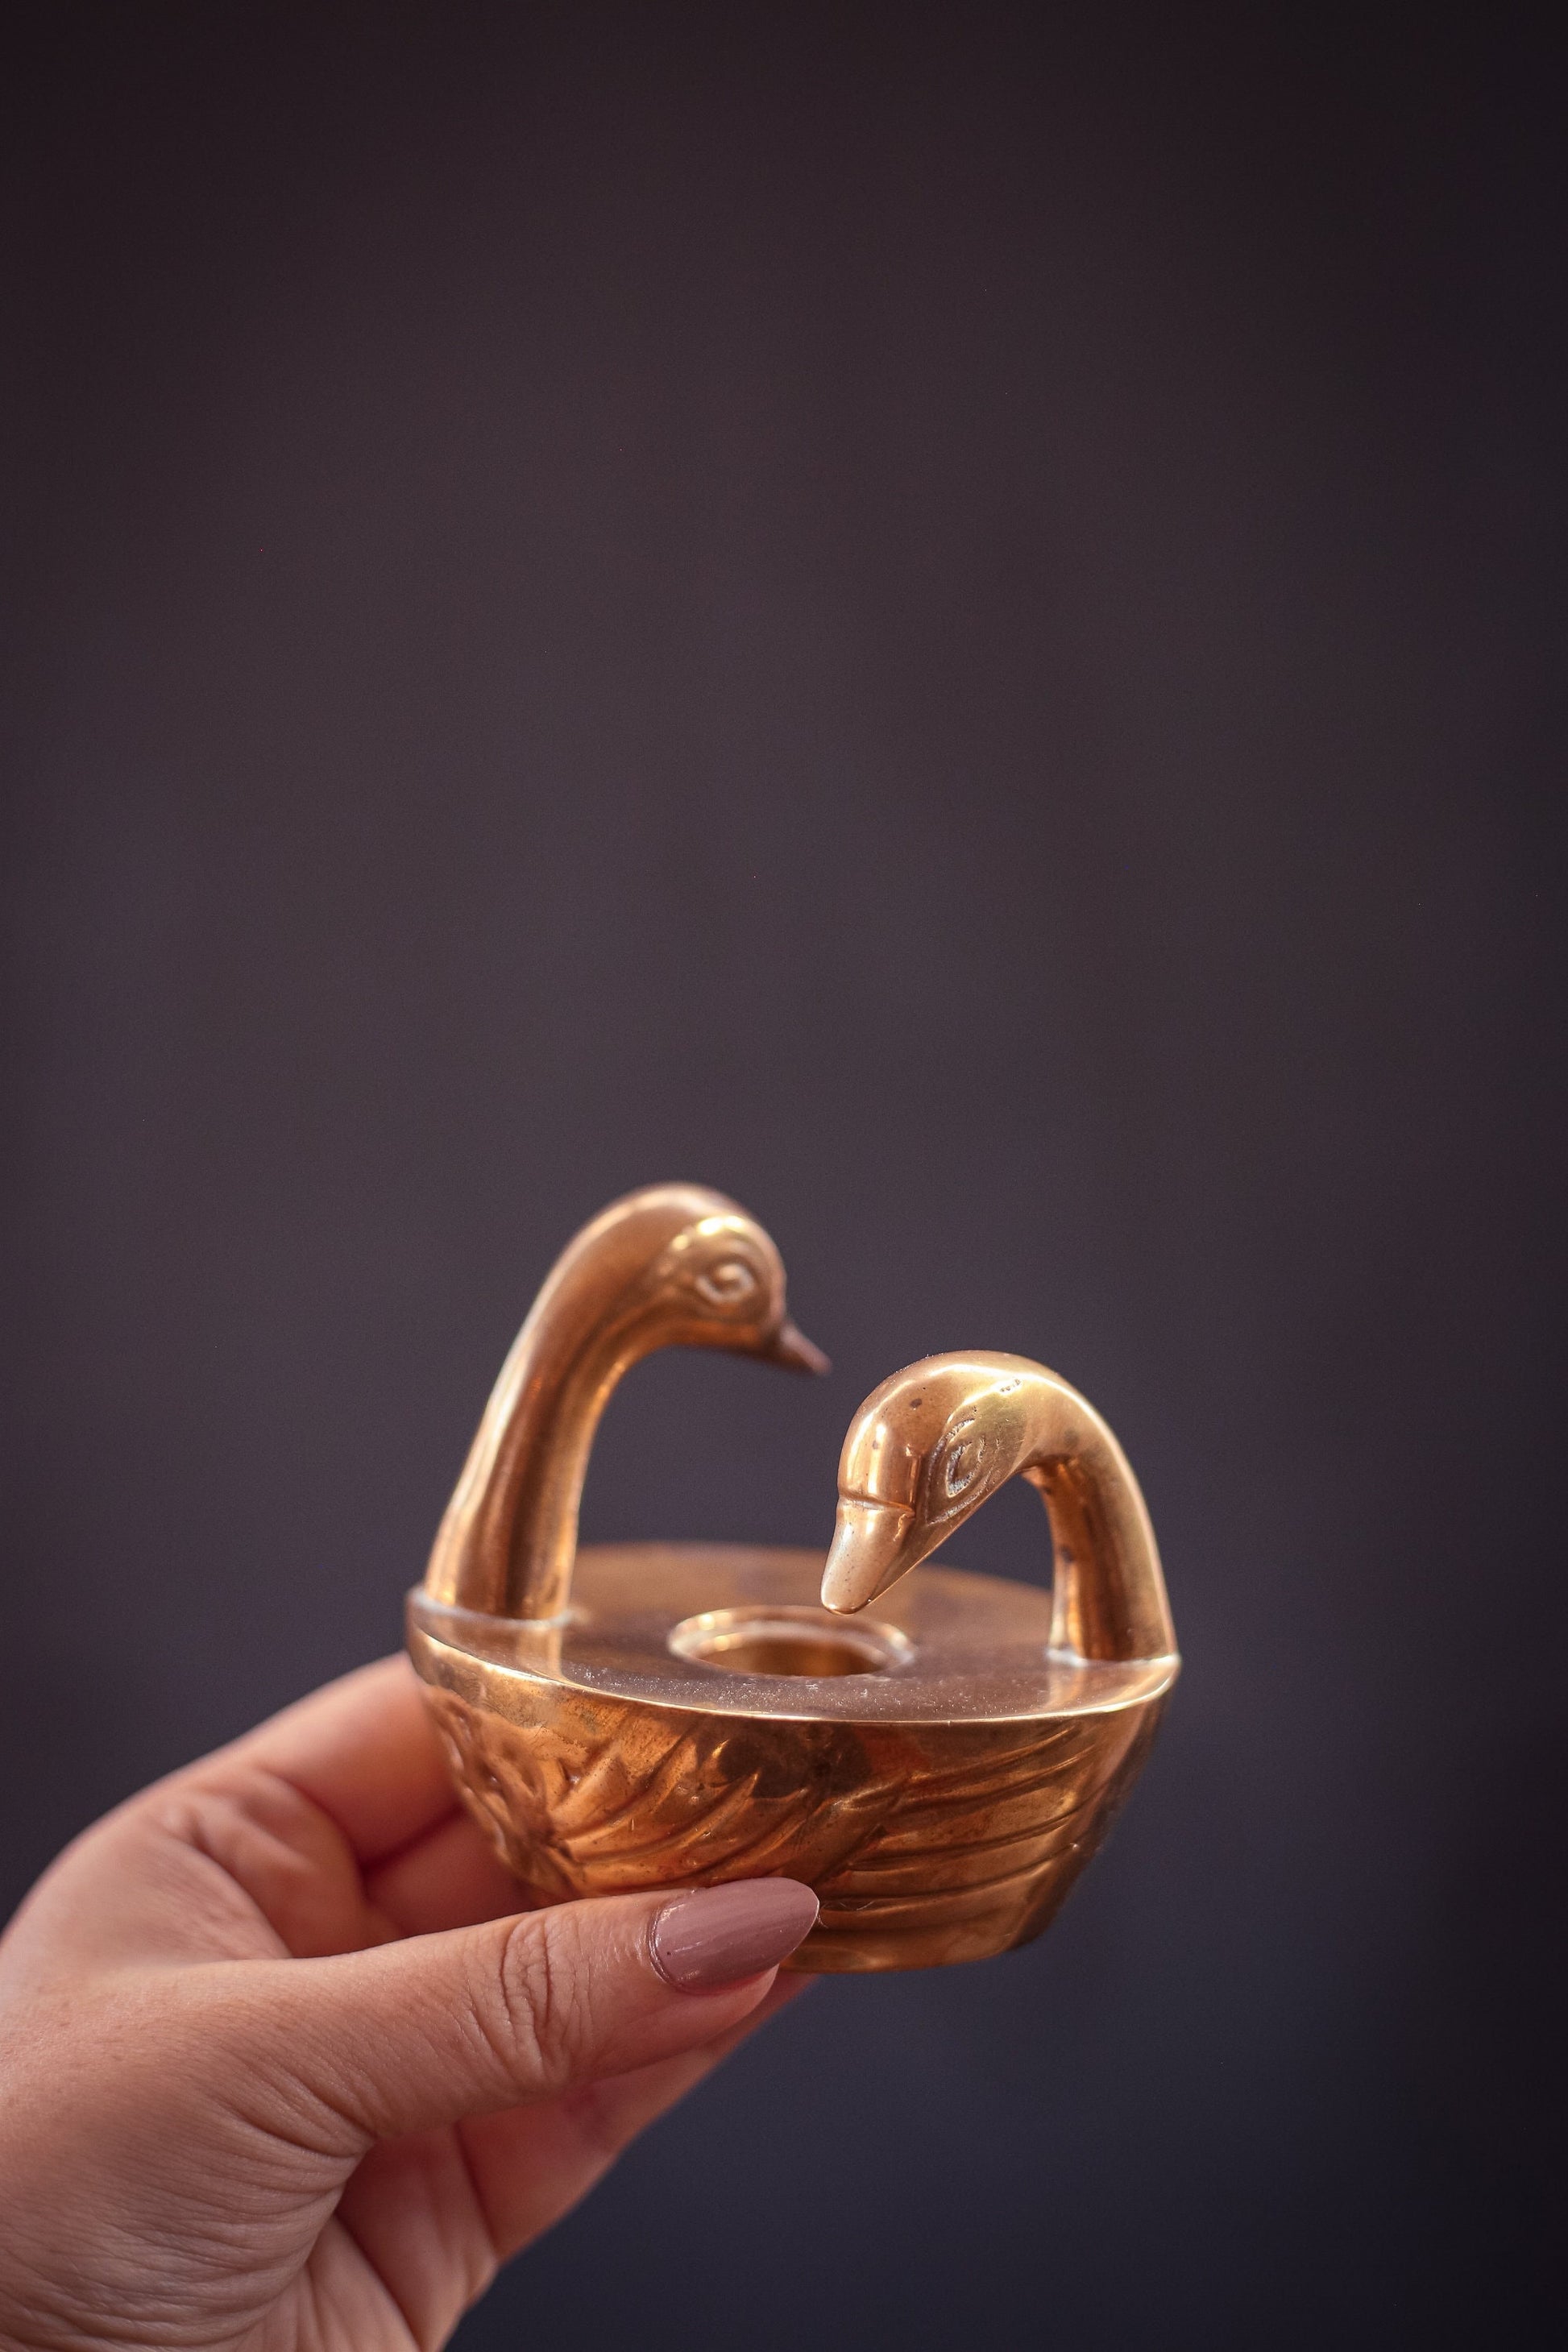 Two Headed Swan Brass Candle Holder - Vintage Midcentury Modern Brass Candle with Swan Heads